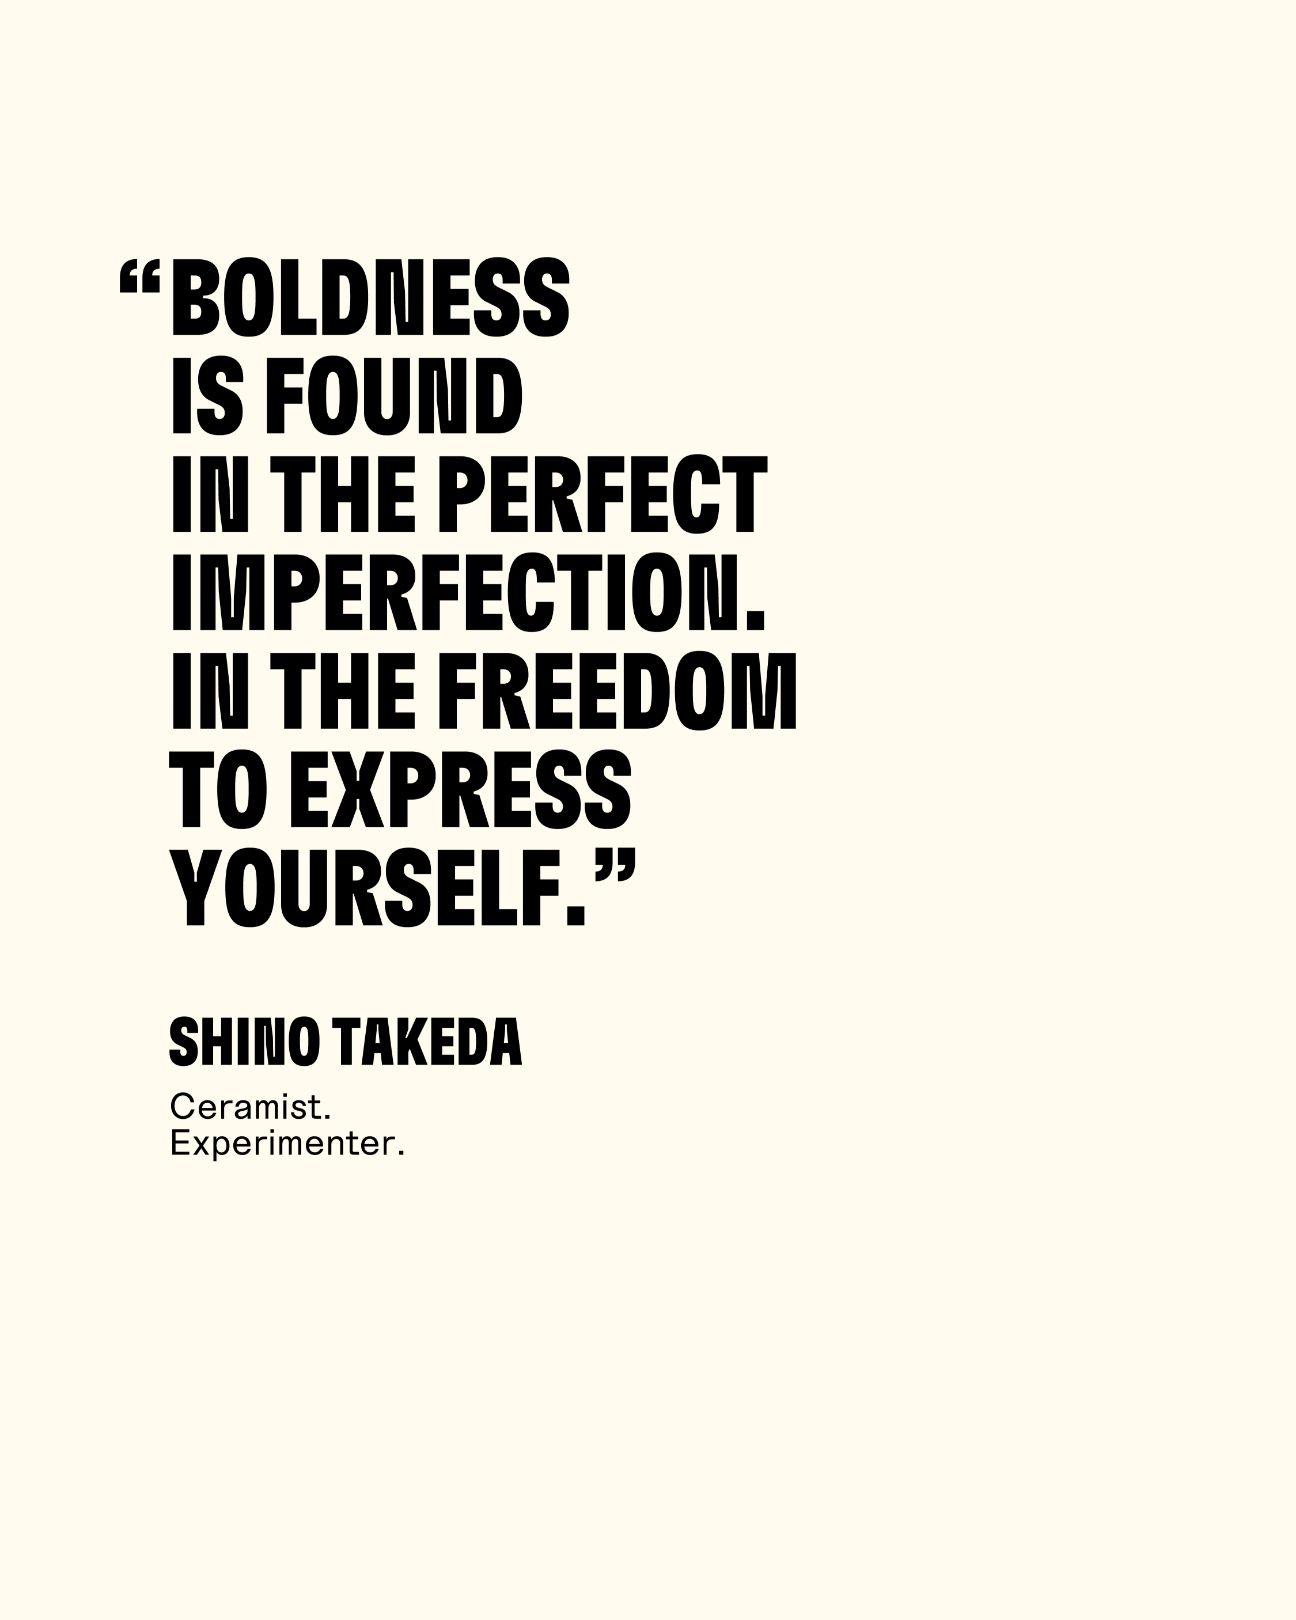 Boldness is found in the perfect imperfection in the freedom to express yourself. Shino Takeda Ceramist. Experimenter.